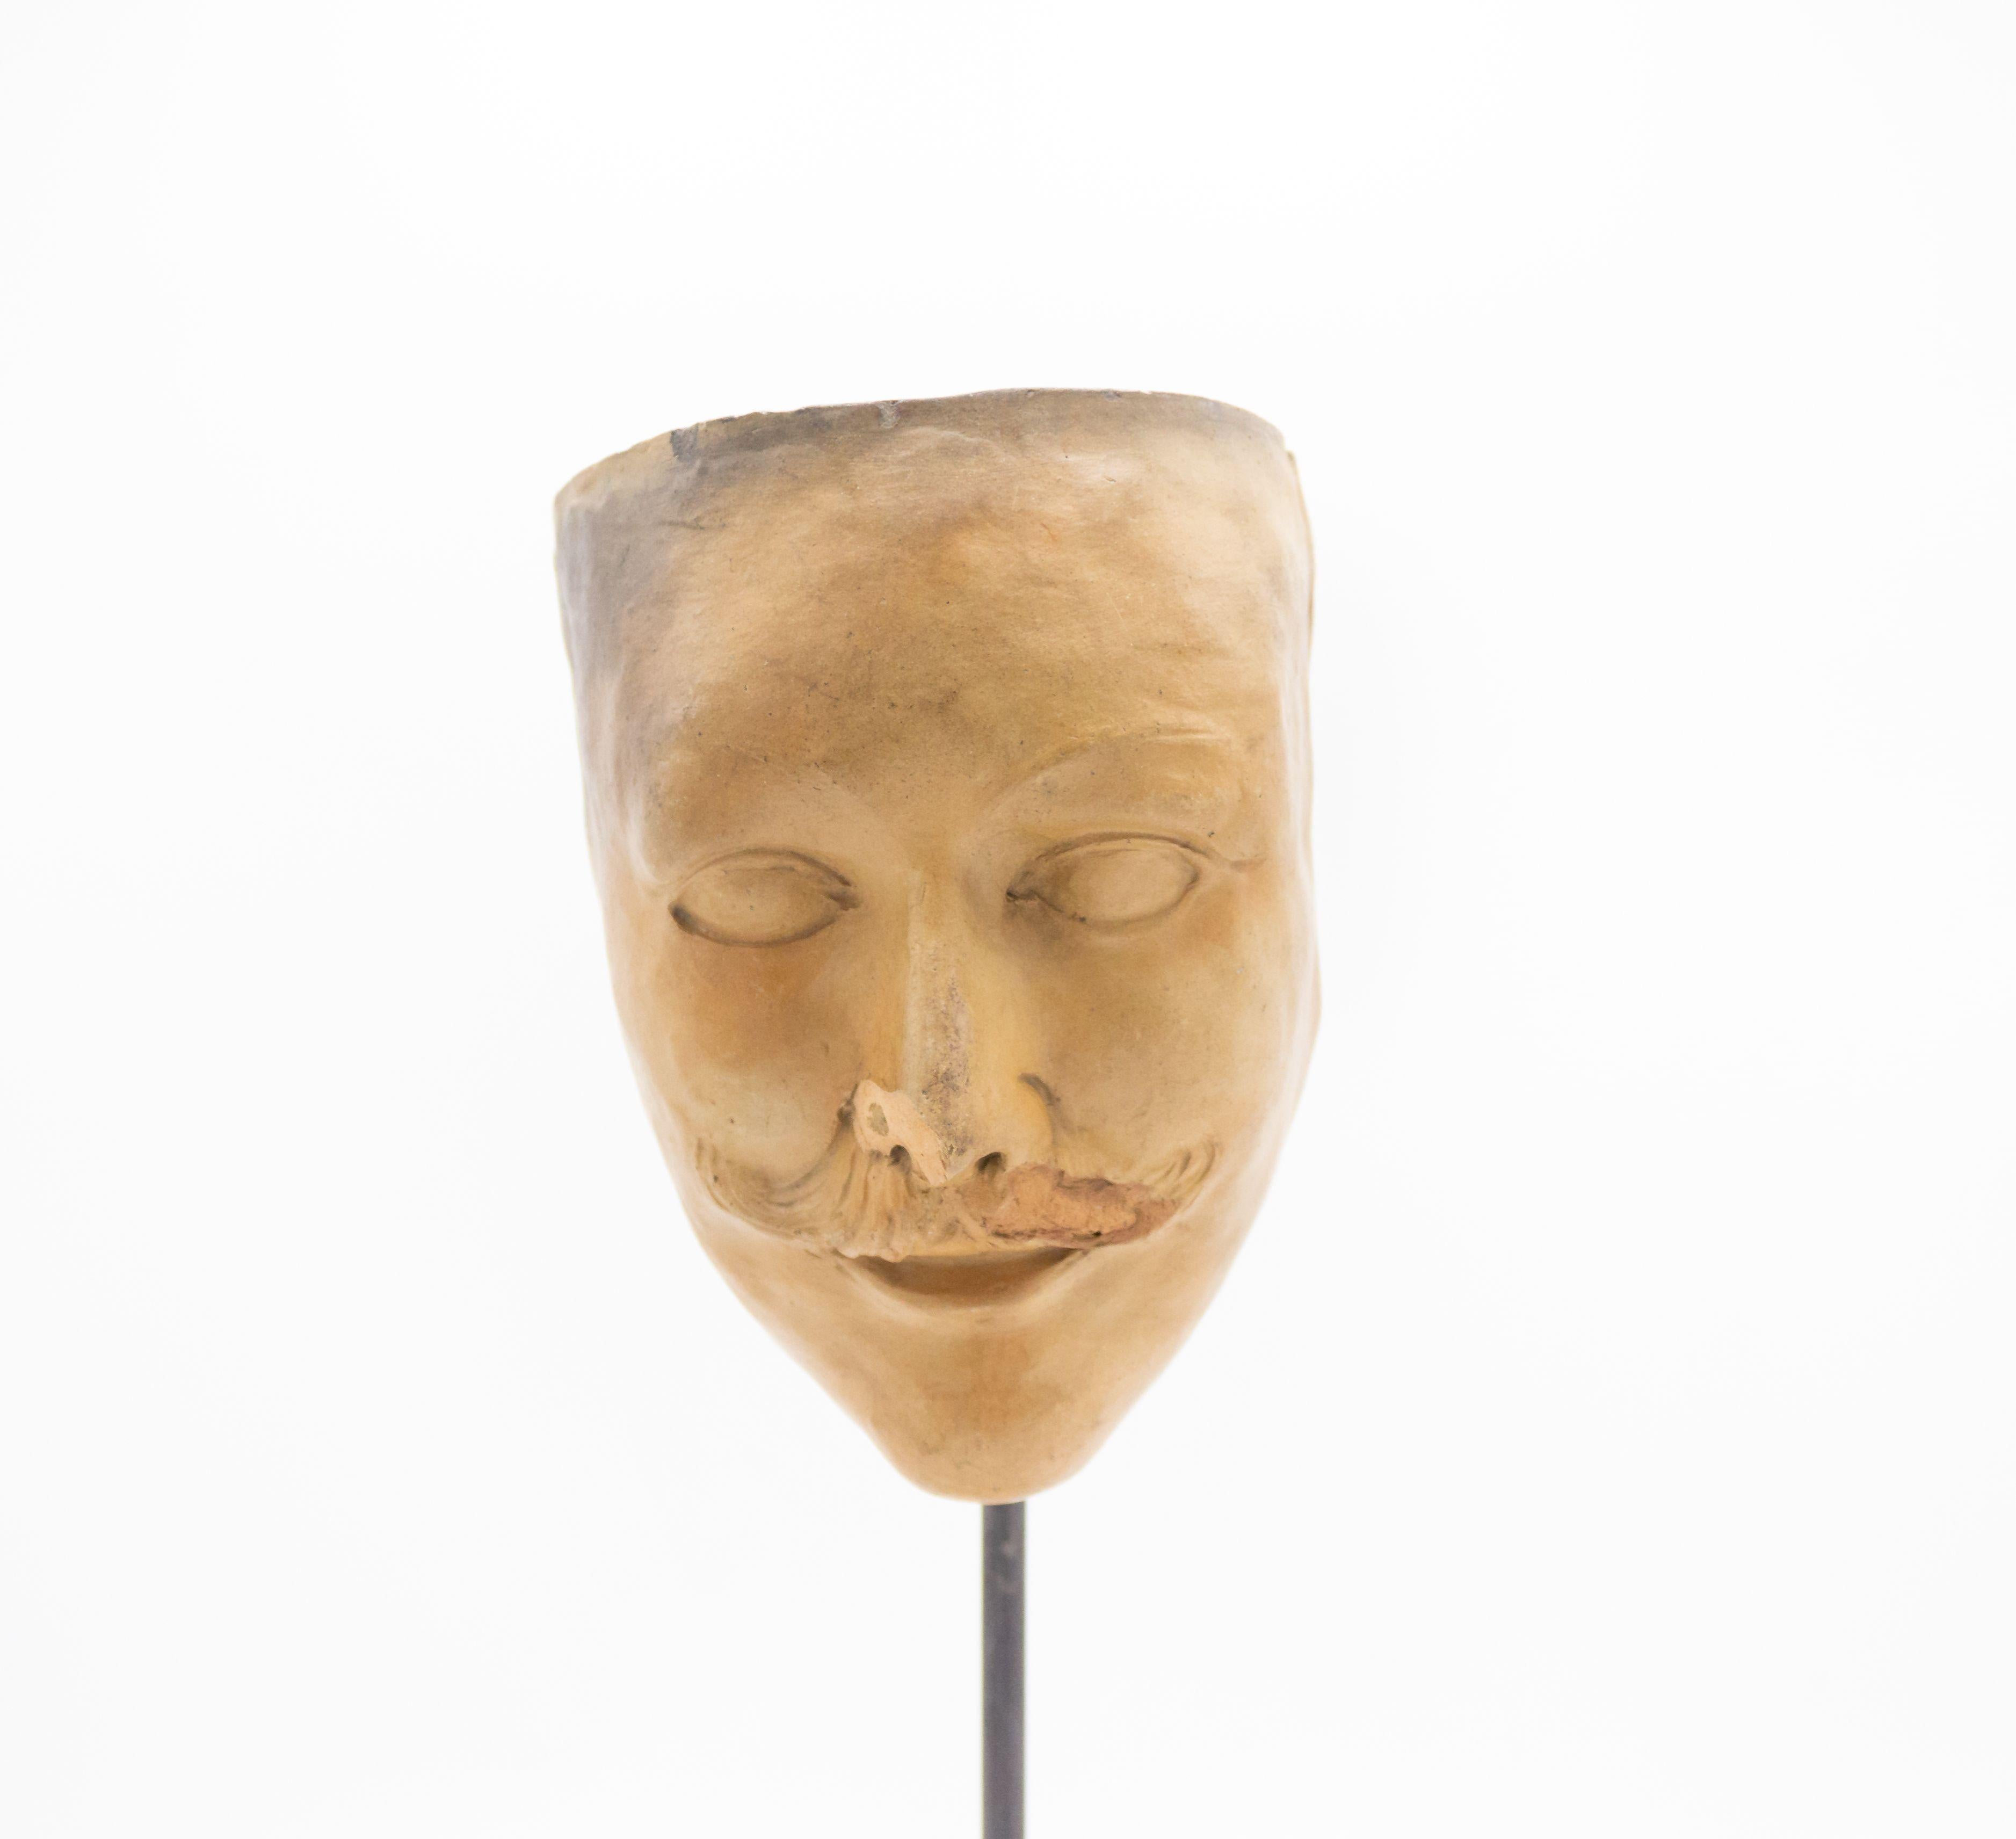 Continental German (late 19th Cent) sculpted terra-cotta master mask mold bust of a male face with a mustach and initials 